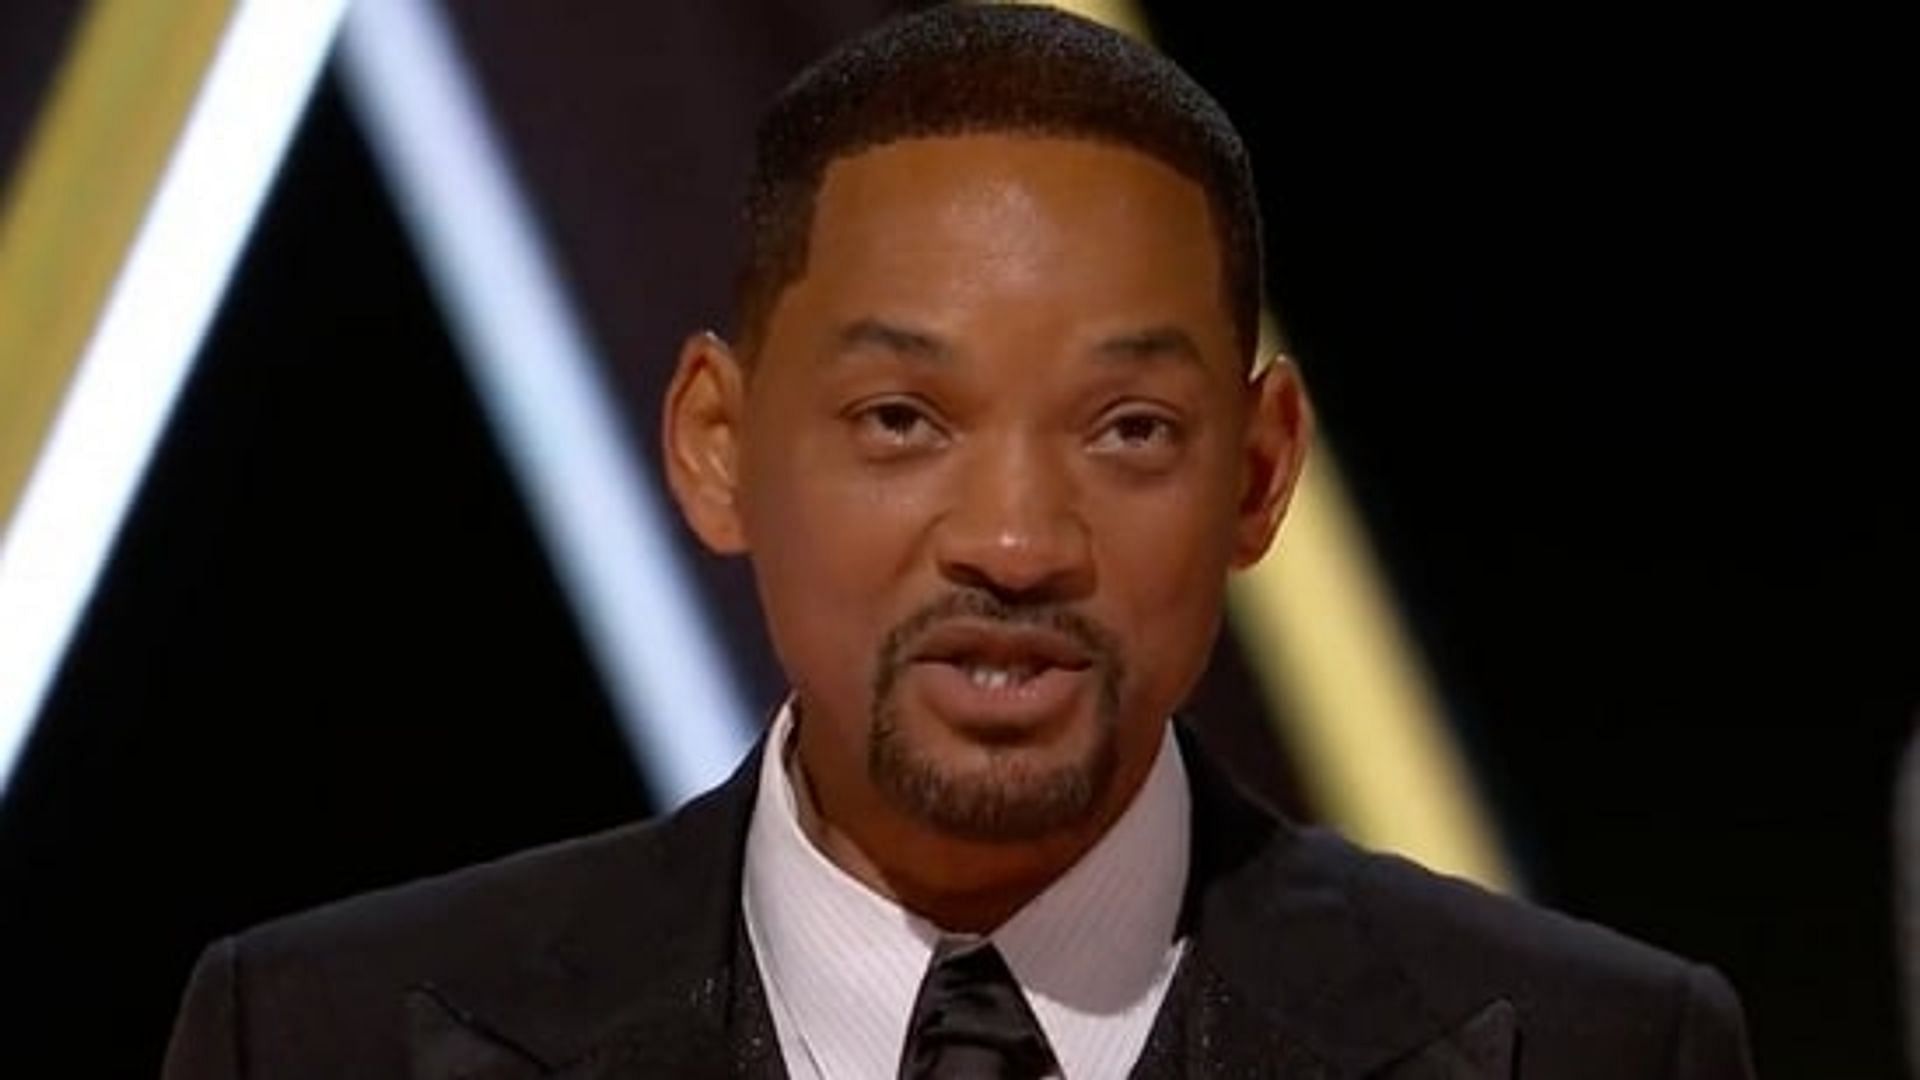 Will Smith at the 2022 Oscars (Image via Getty Images)